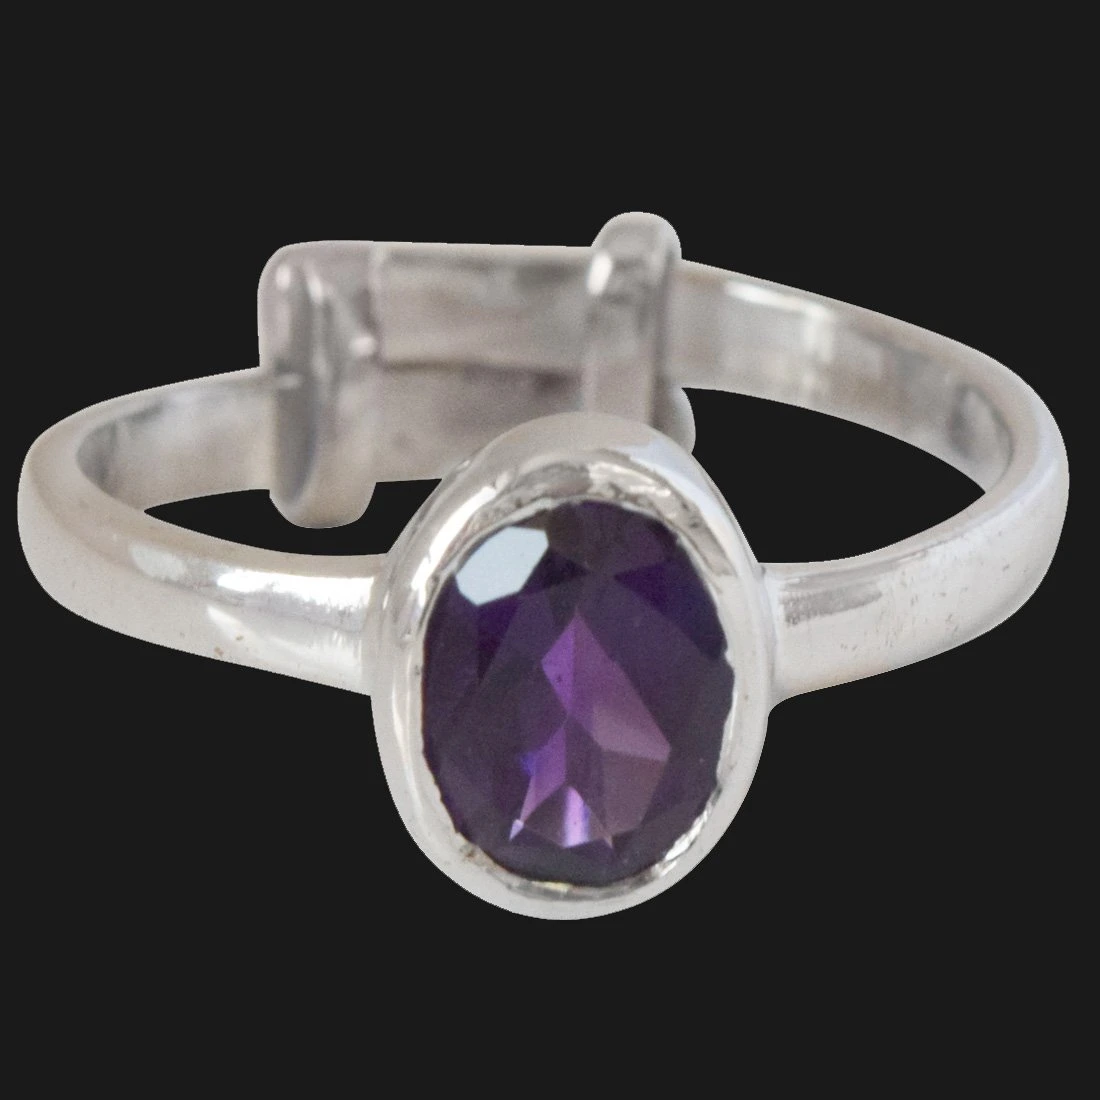 1.07cts Oval Faceted Purple Amethyst and 925 Silver Astrological Ring (GSR62)